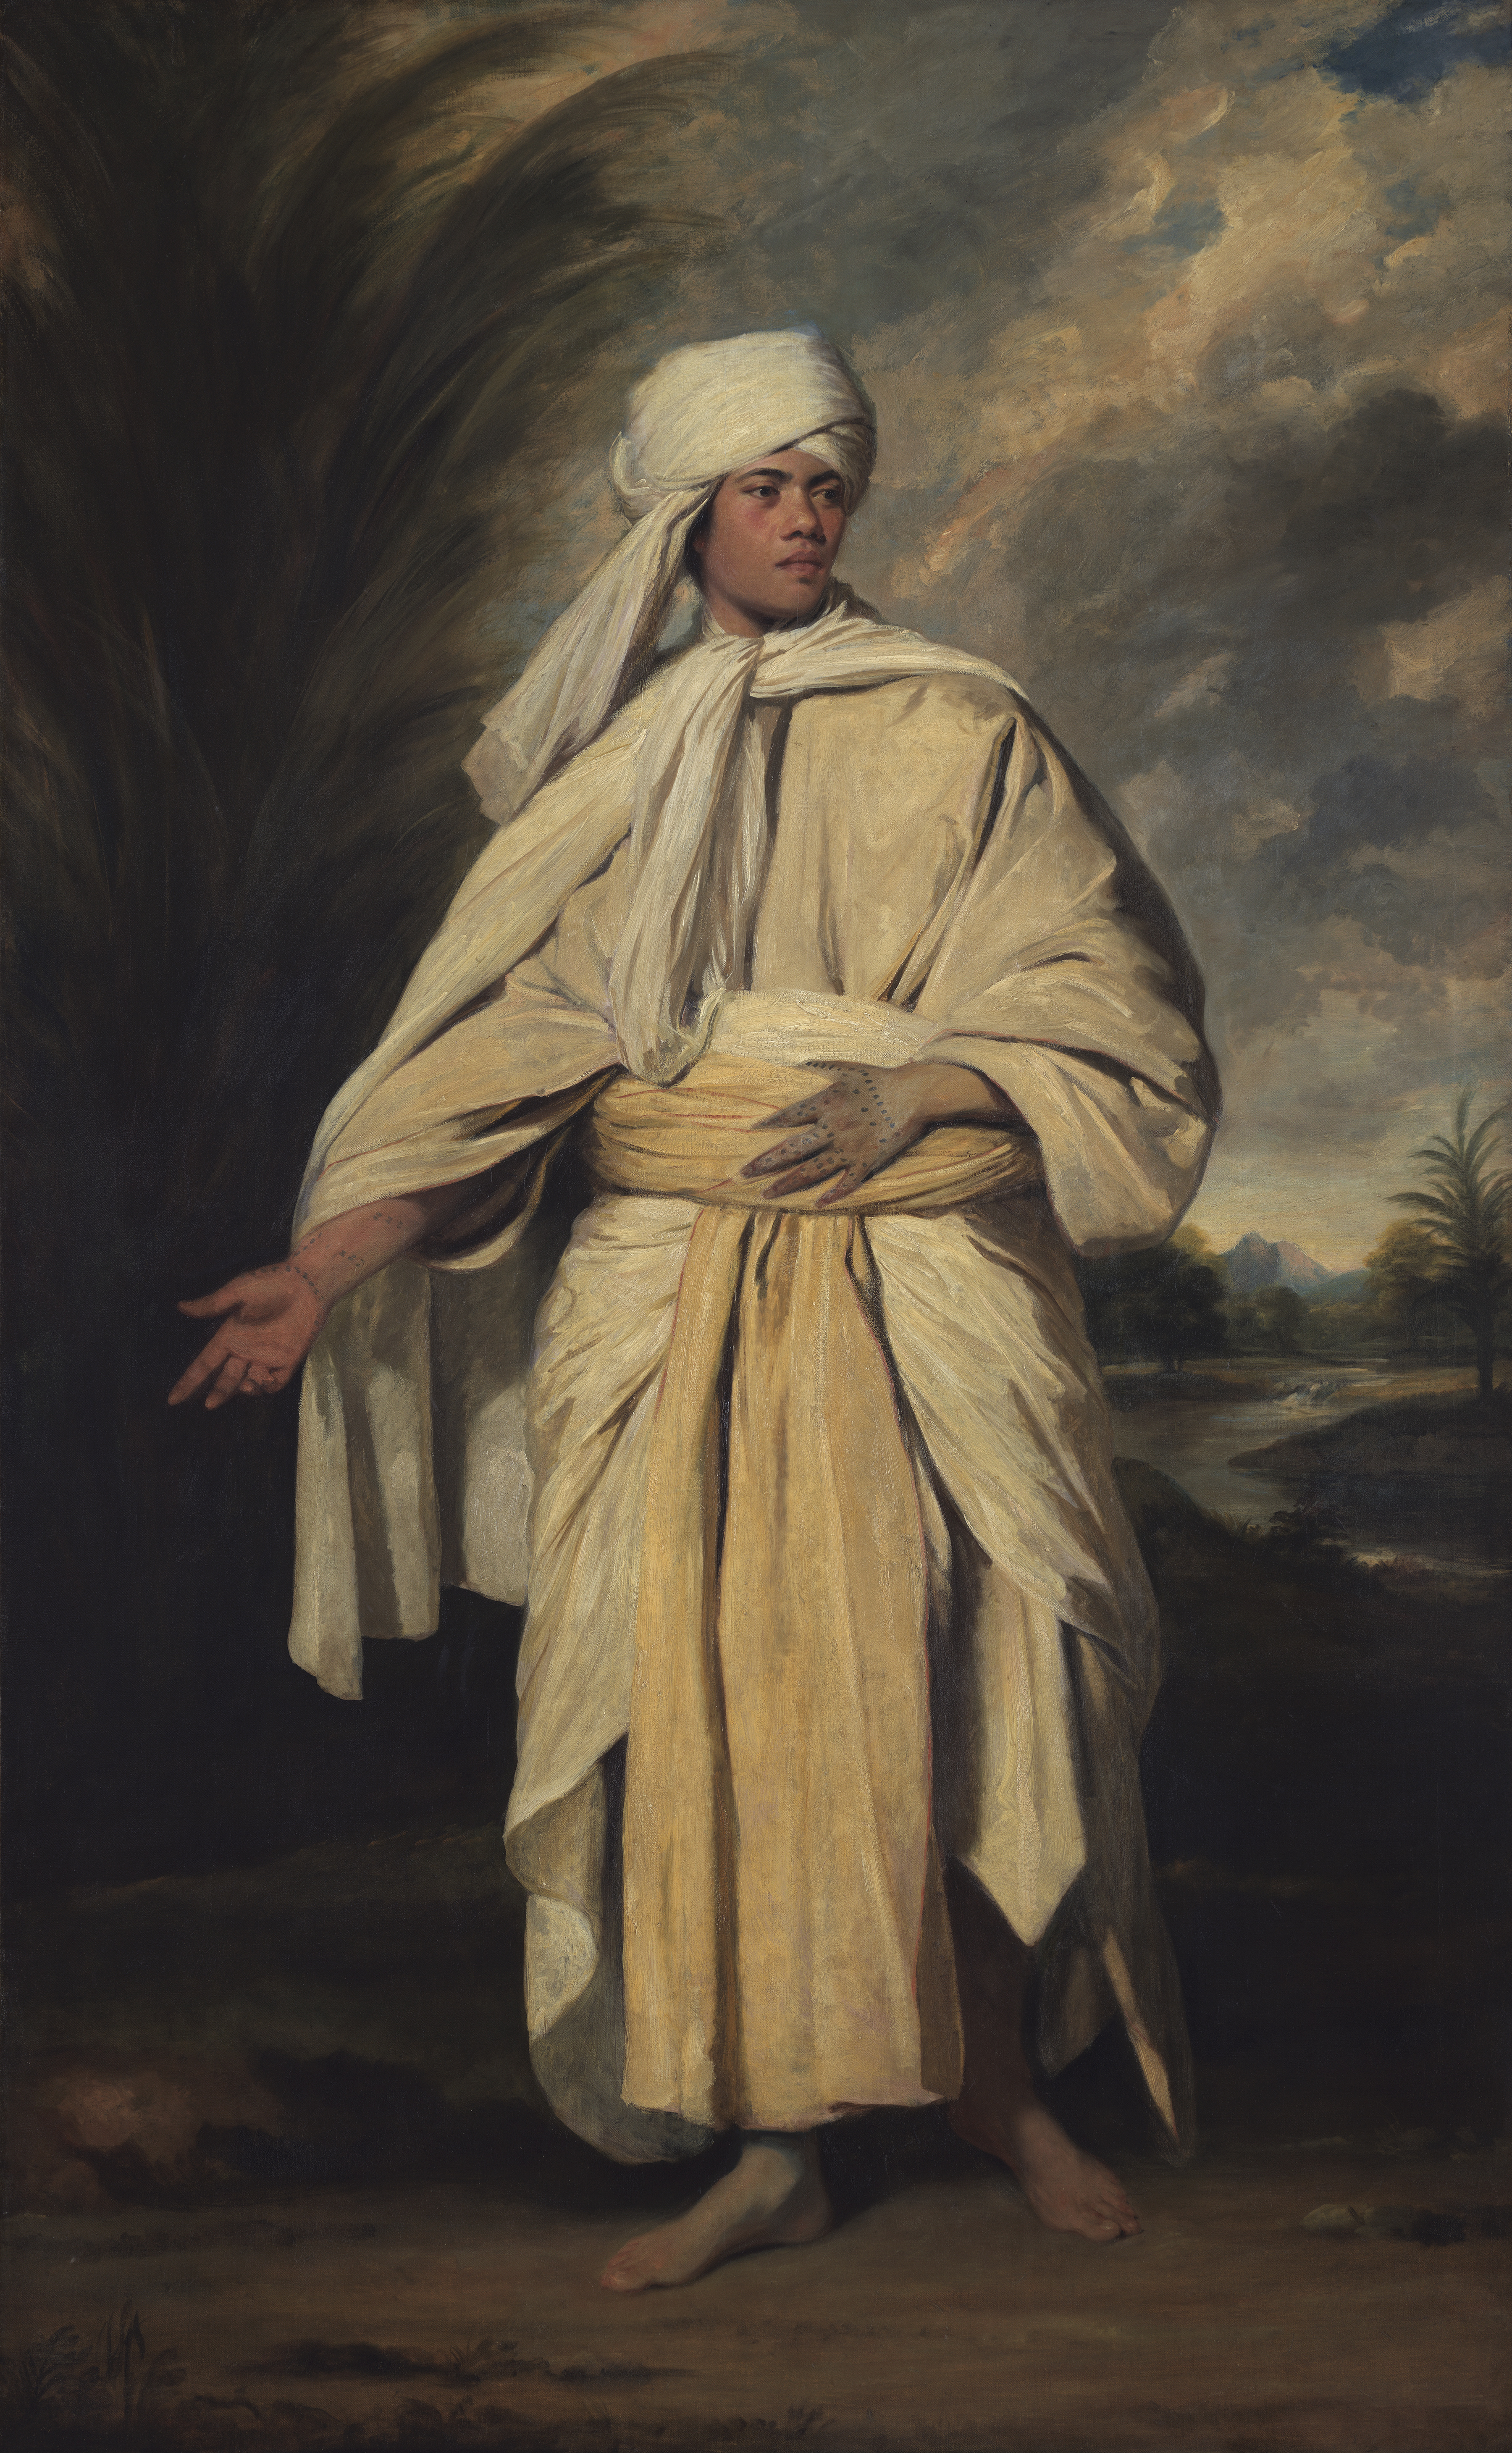 a painting of a man in a robe